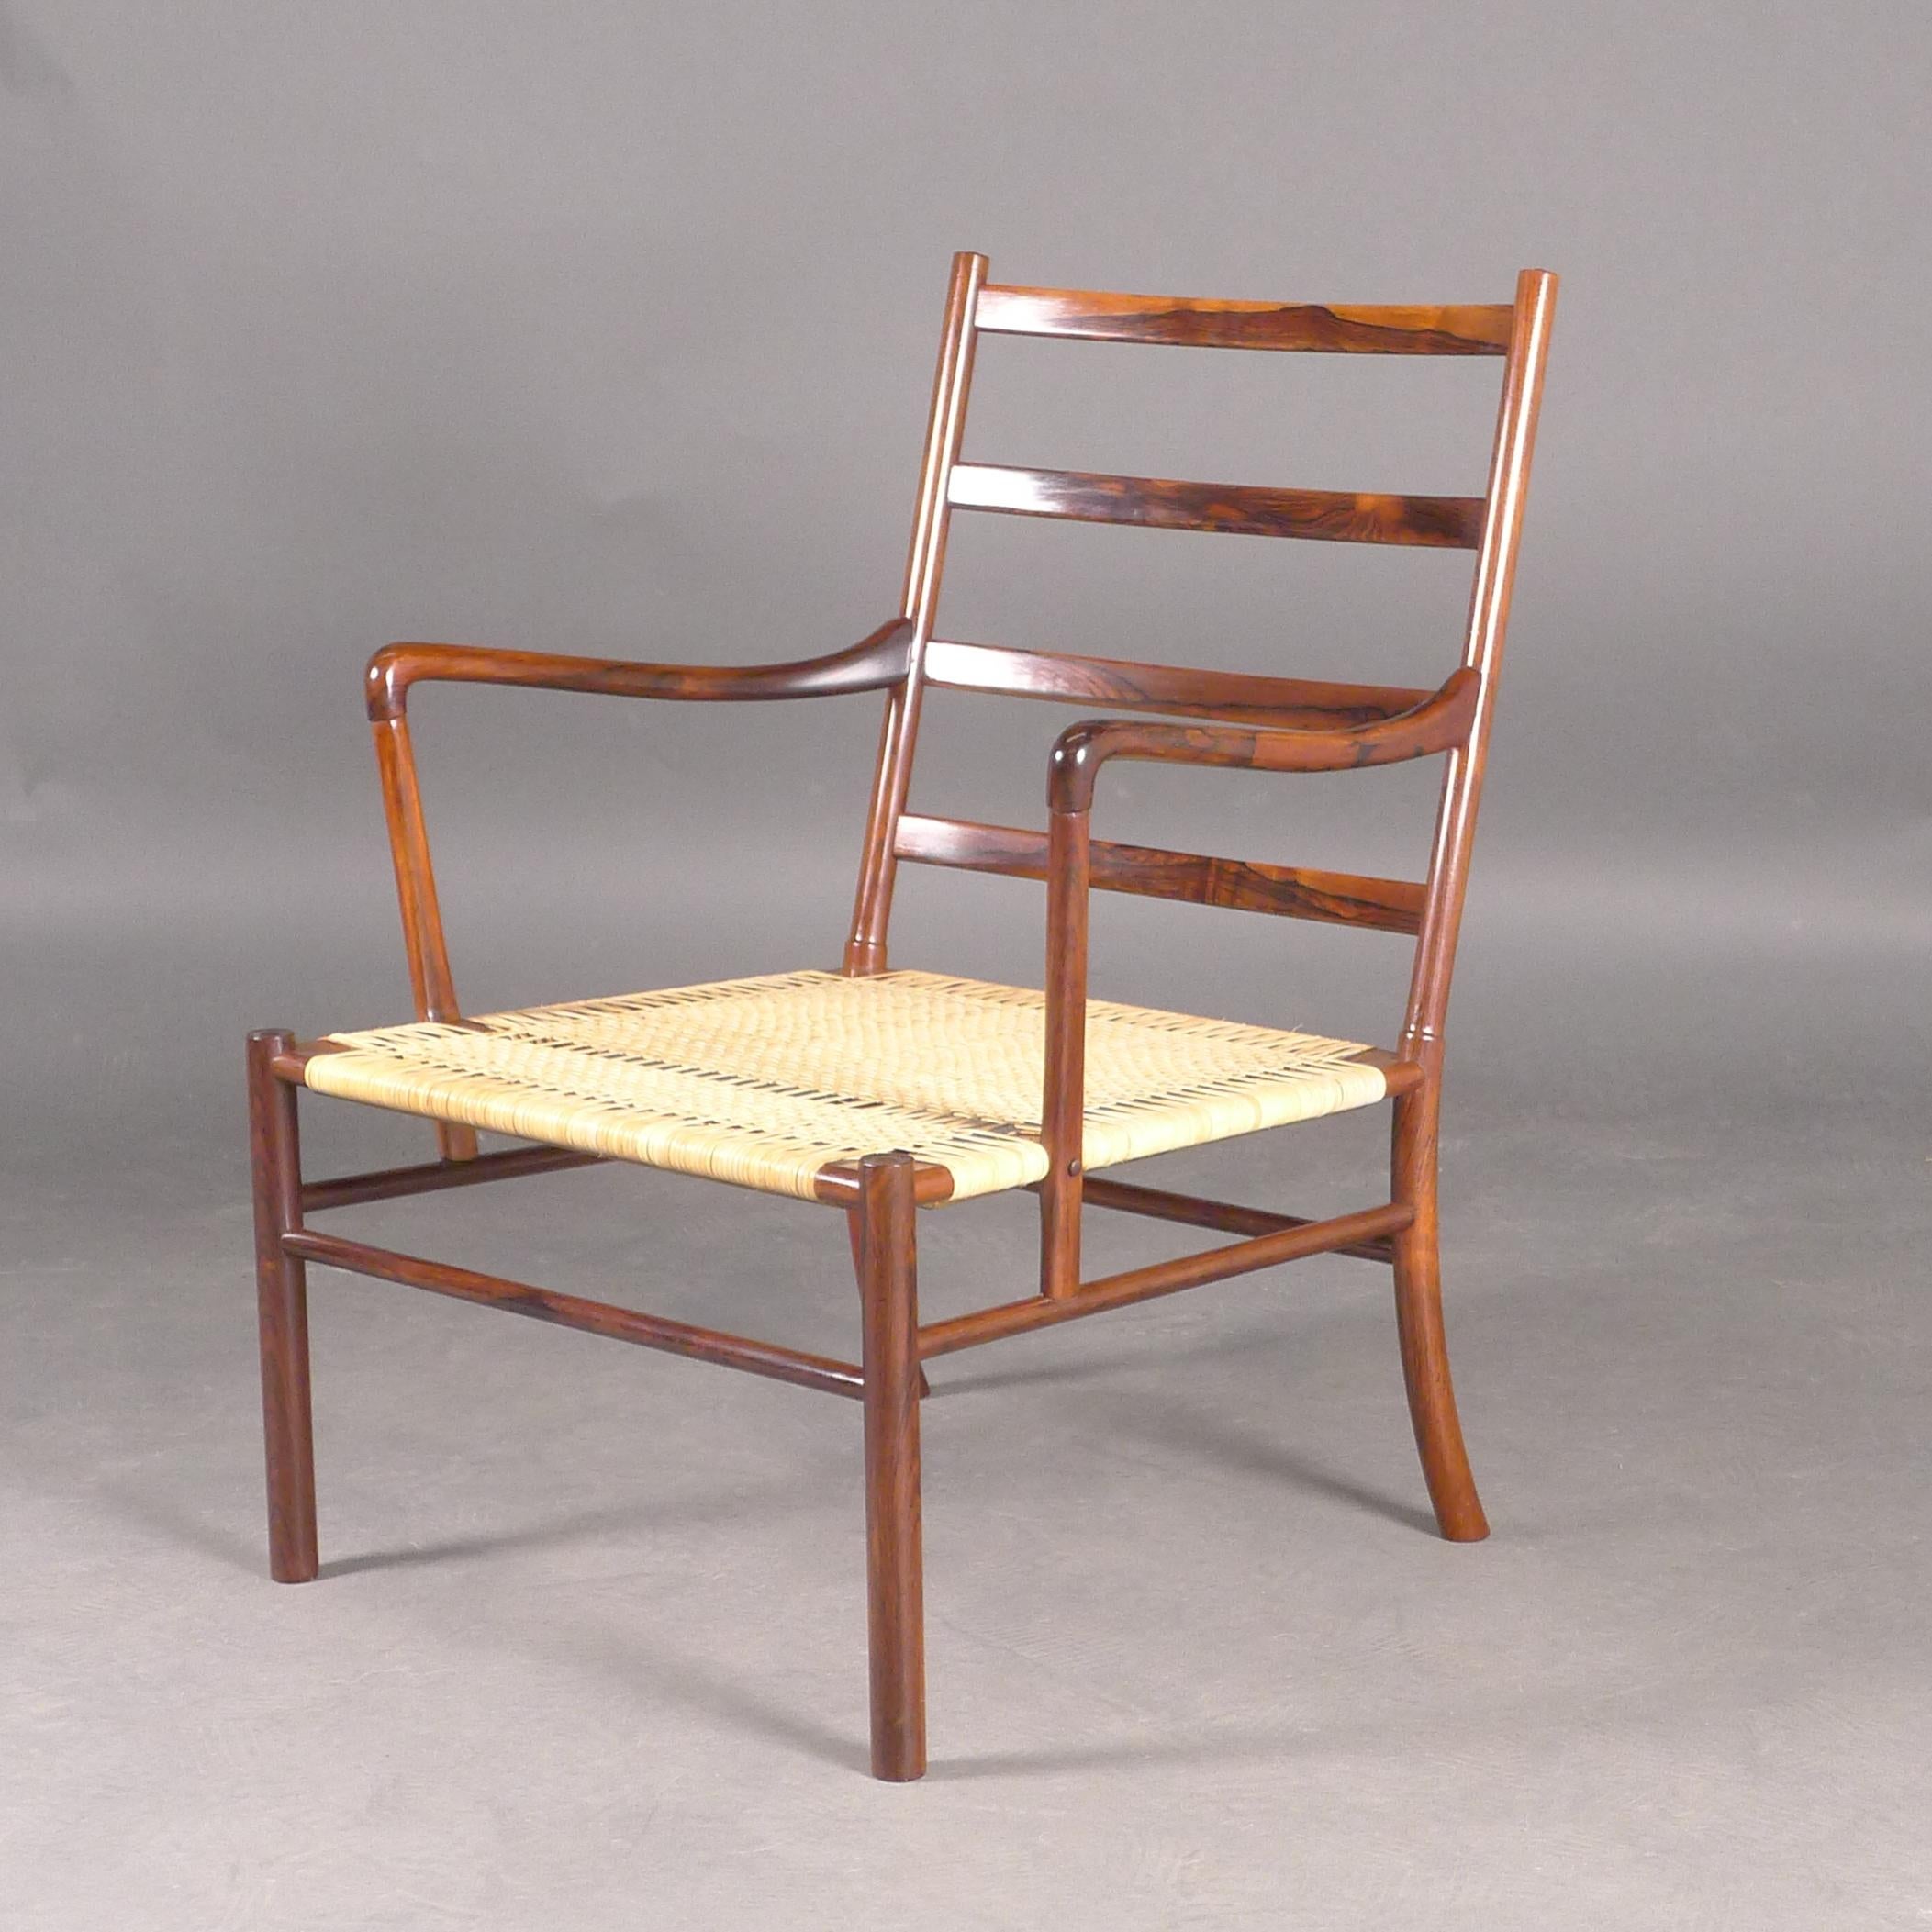 Ole Wanscher, Pair of Colonial Chairs, model PJ149, 1st Edition 1949, Rosewood 3